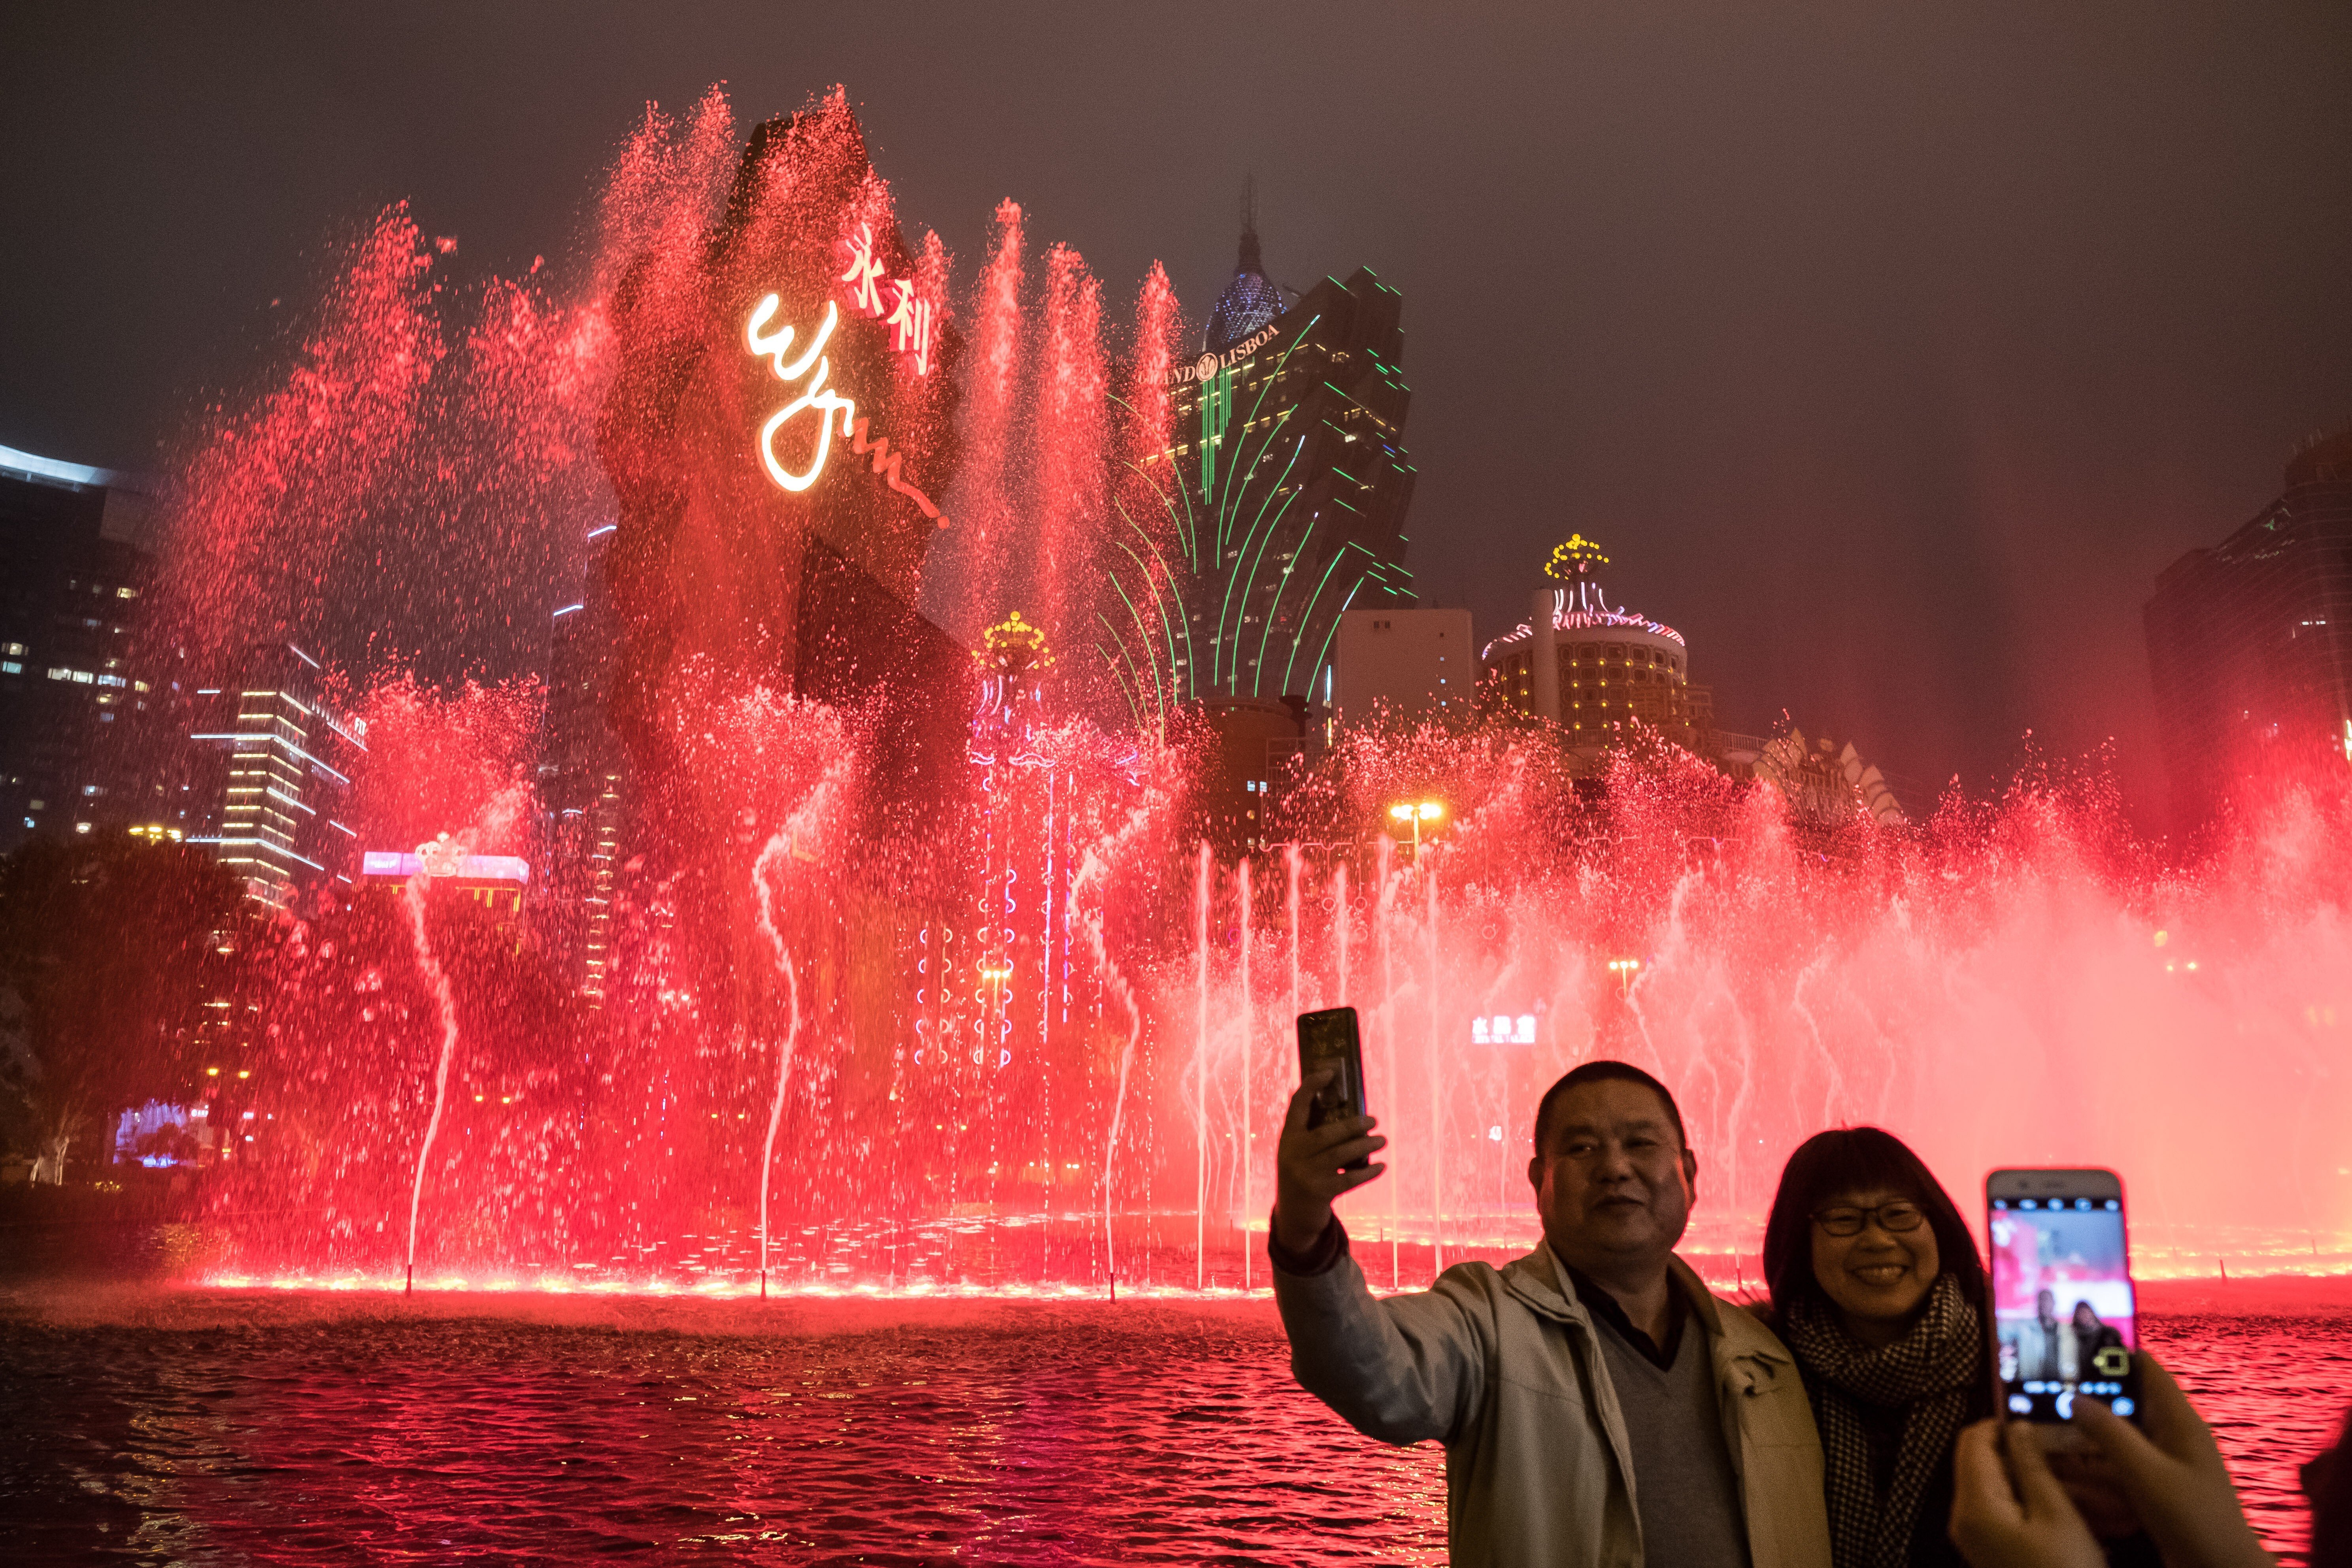 American operators in Macau could face new challenges under the US ban on WeChat, observers say. Photo: Reuters